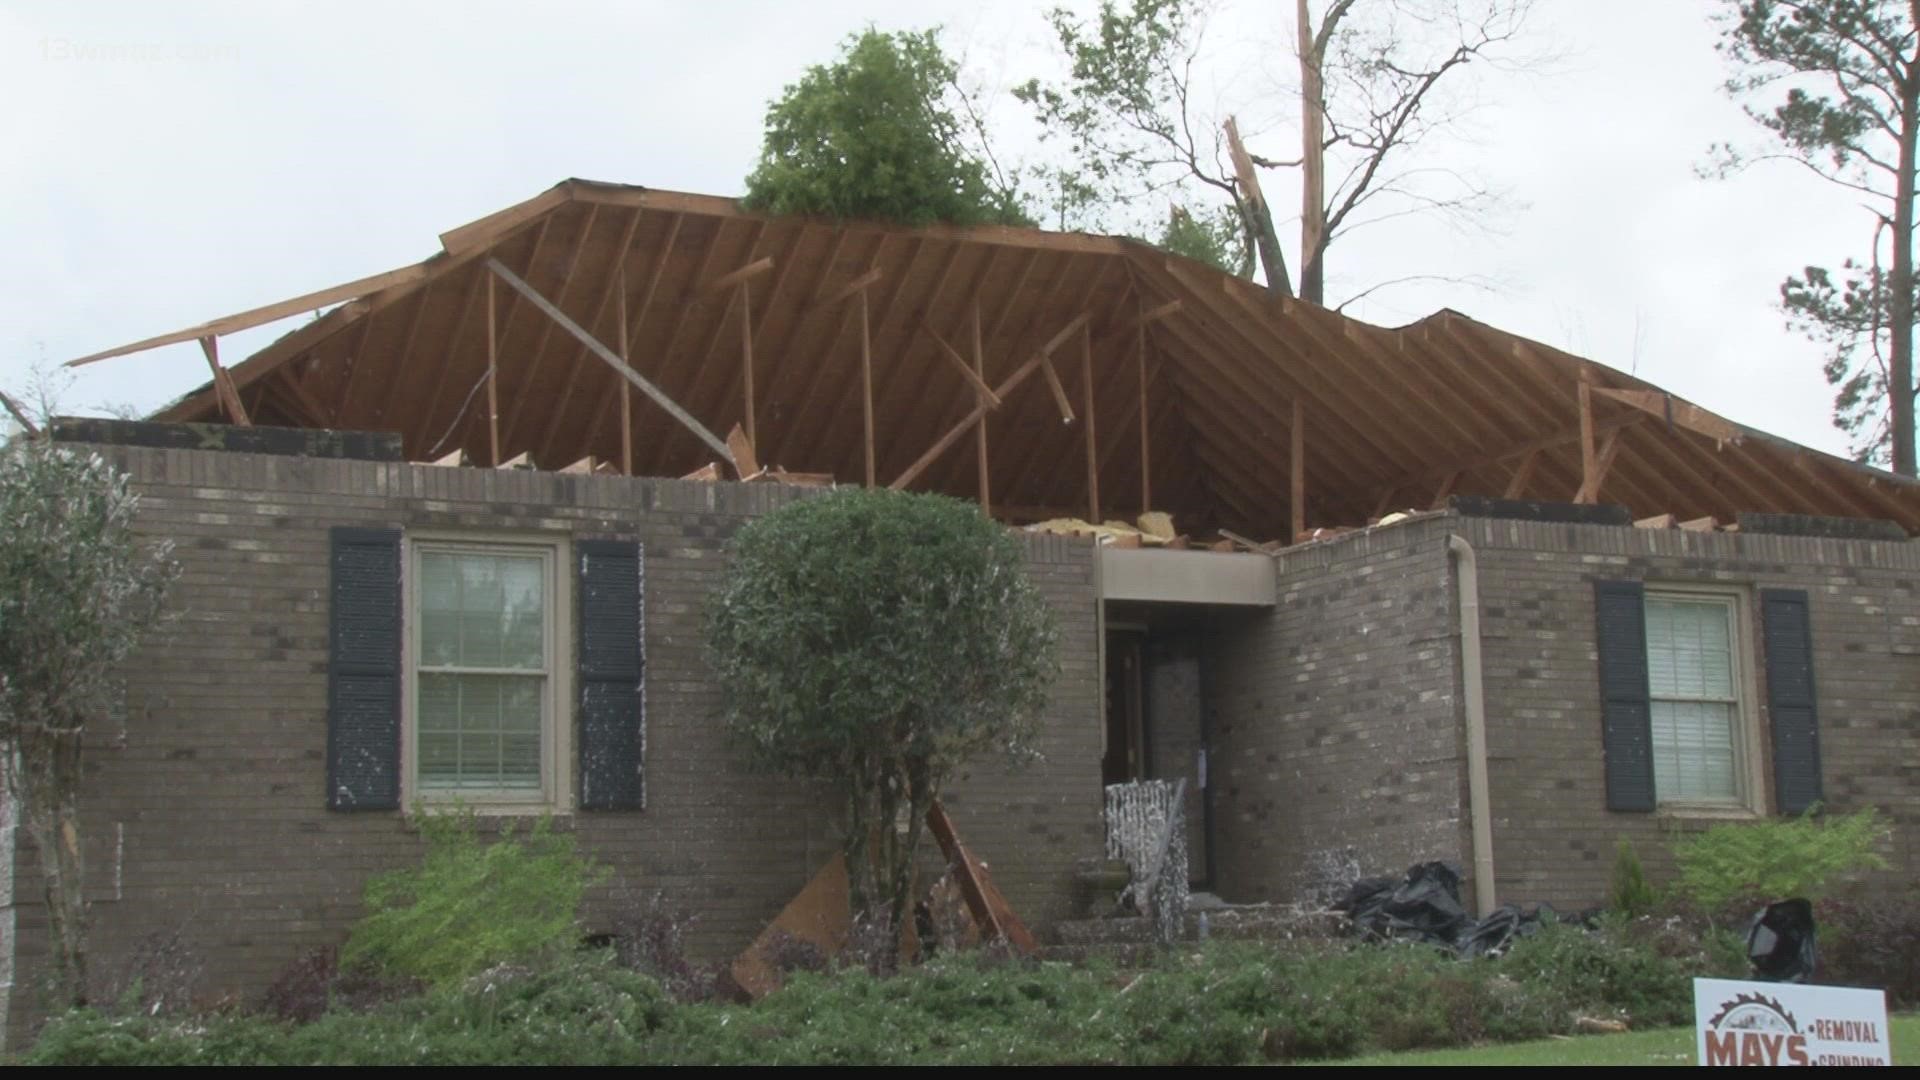 Getting insurance companies involved to help deal with the damage is the next step, but experts say homeowners should be careful.